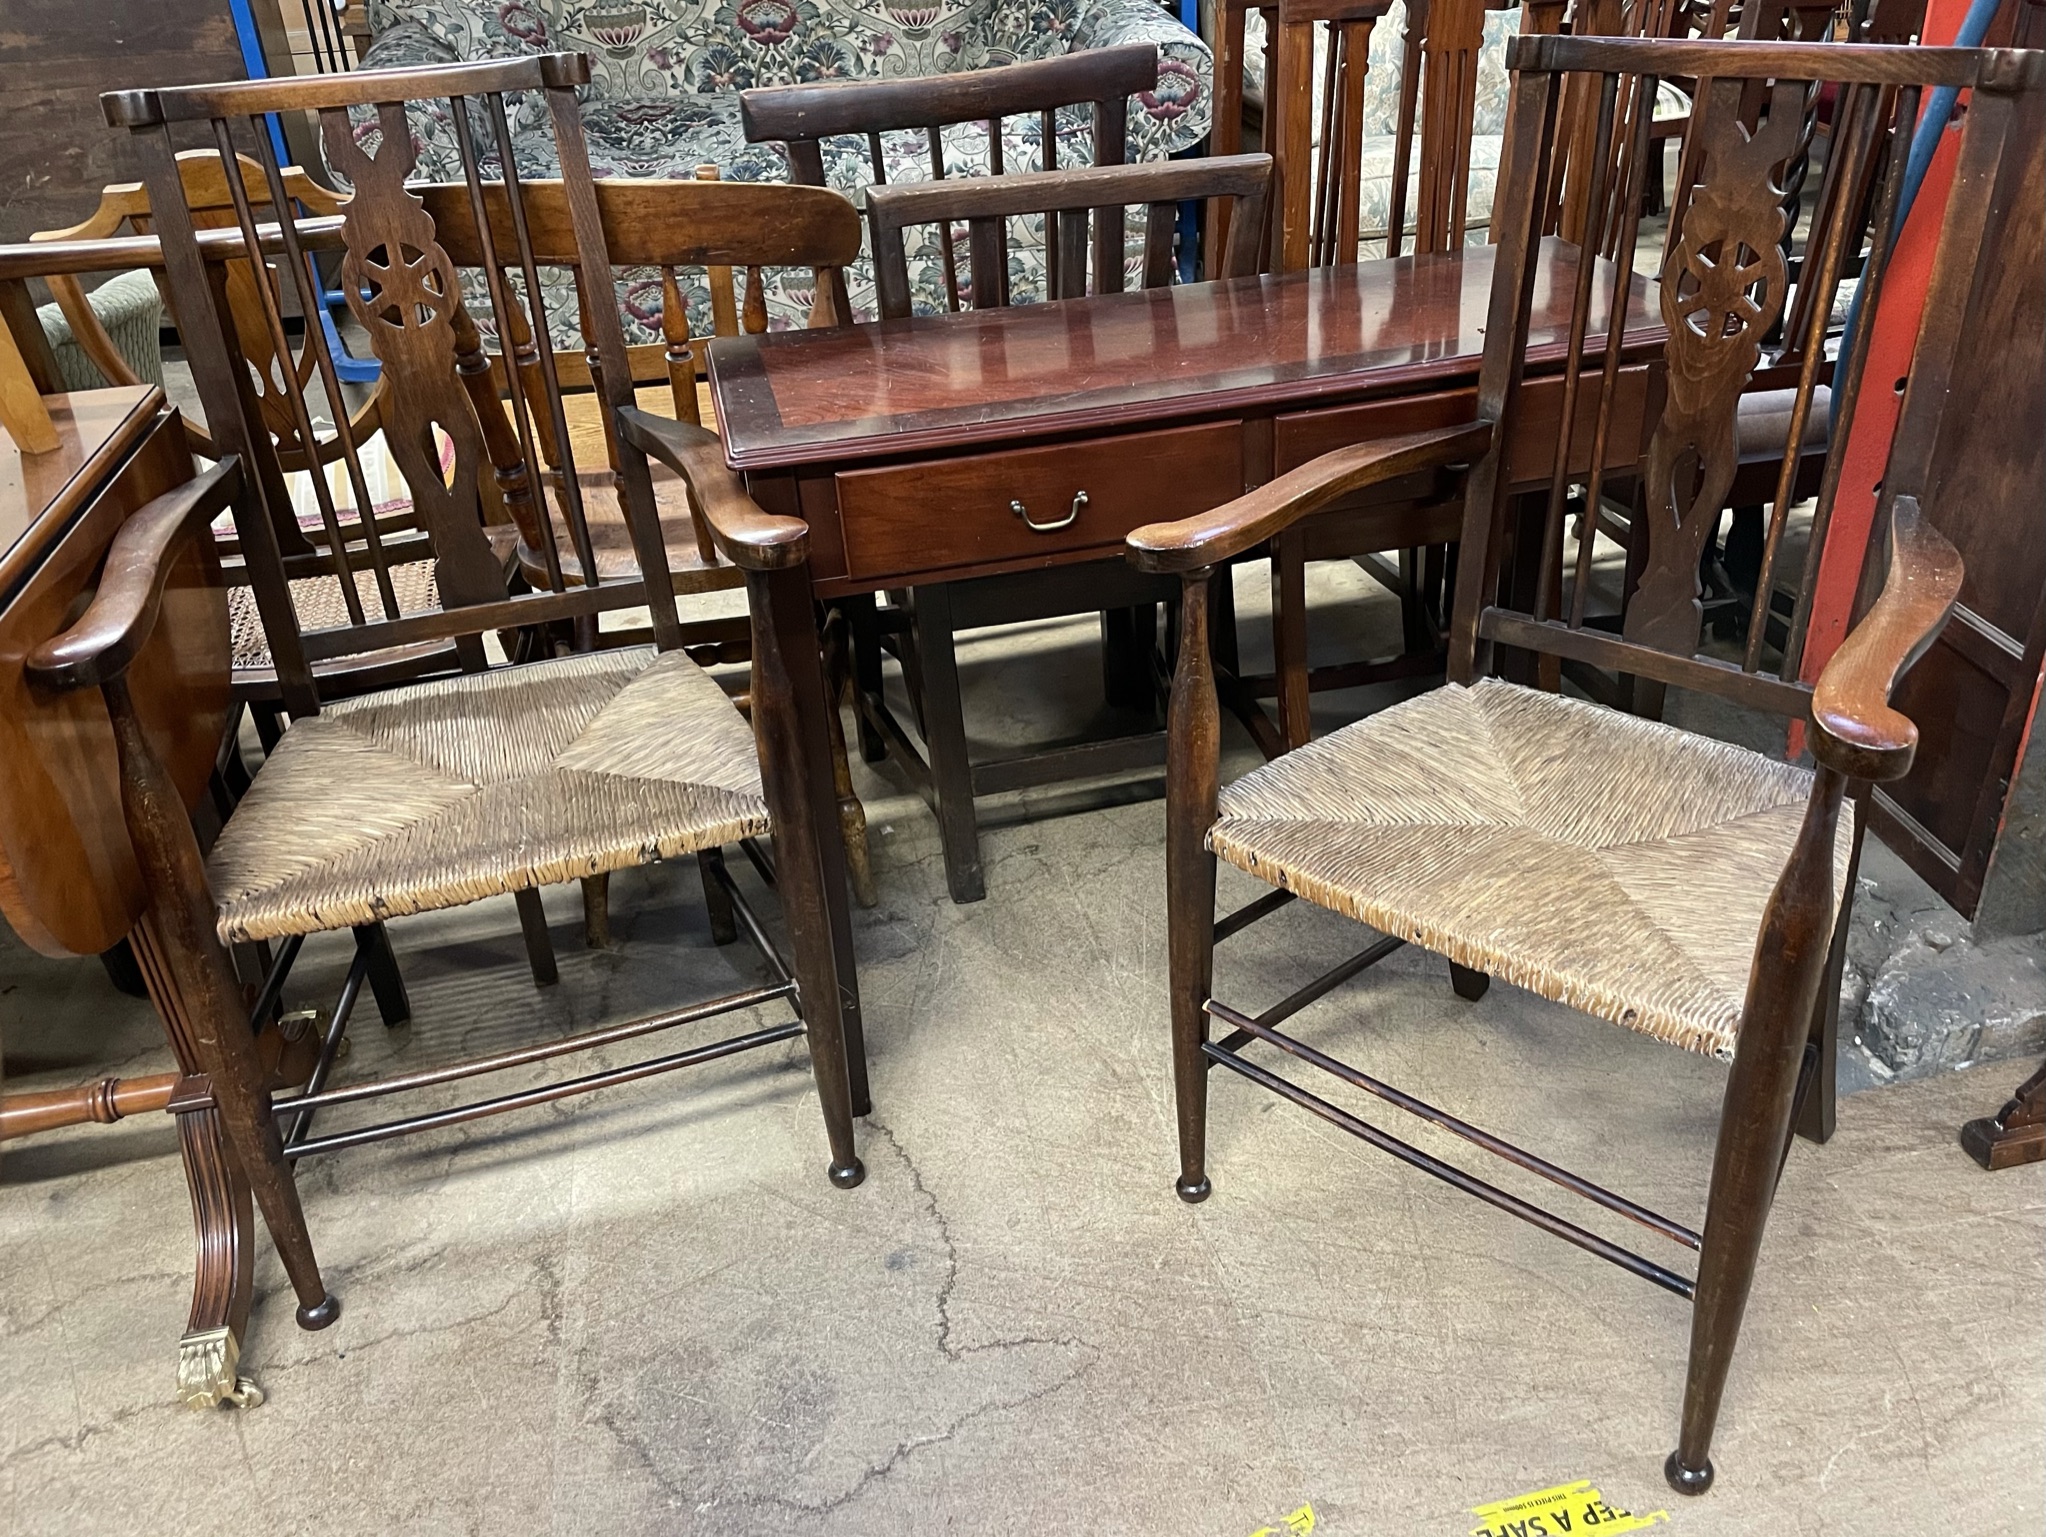 A pair of Arts and Crafts style elbow chairs together with a reproduction mahogany side table